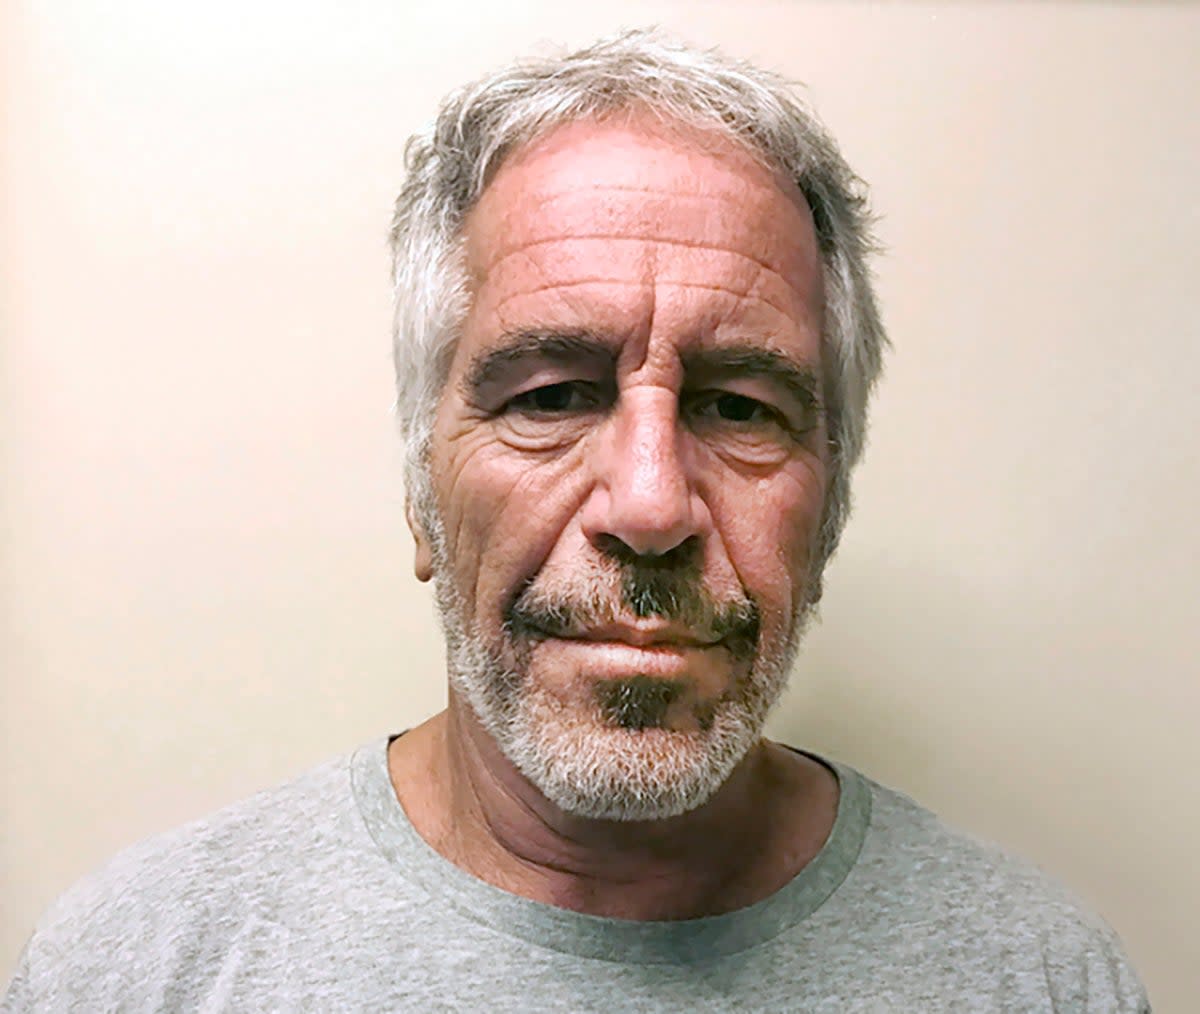 In this 28 March 2017 photo provided by the New York State Sex Offender Registry shows Jeffrey Epstein (New York State Sex Offender Registry)